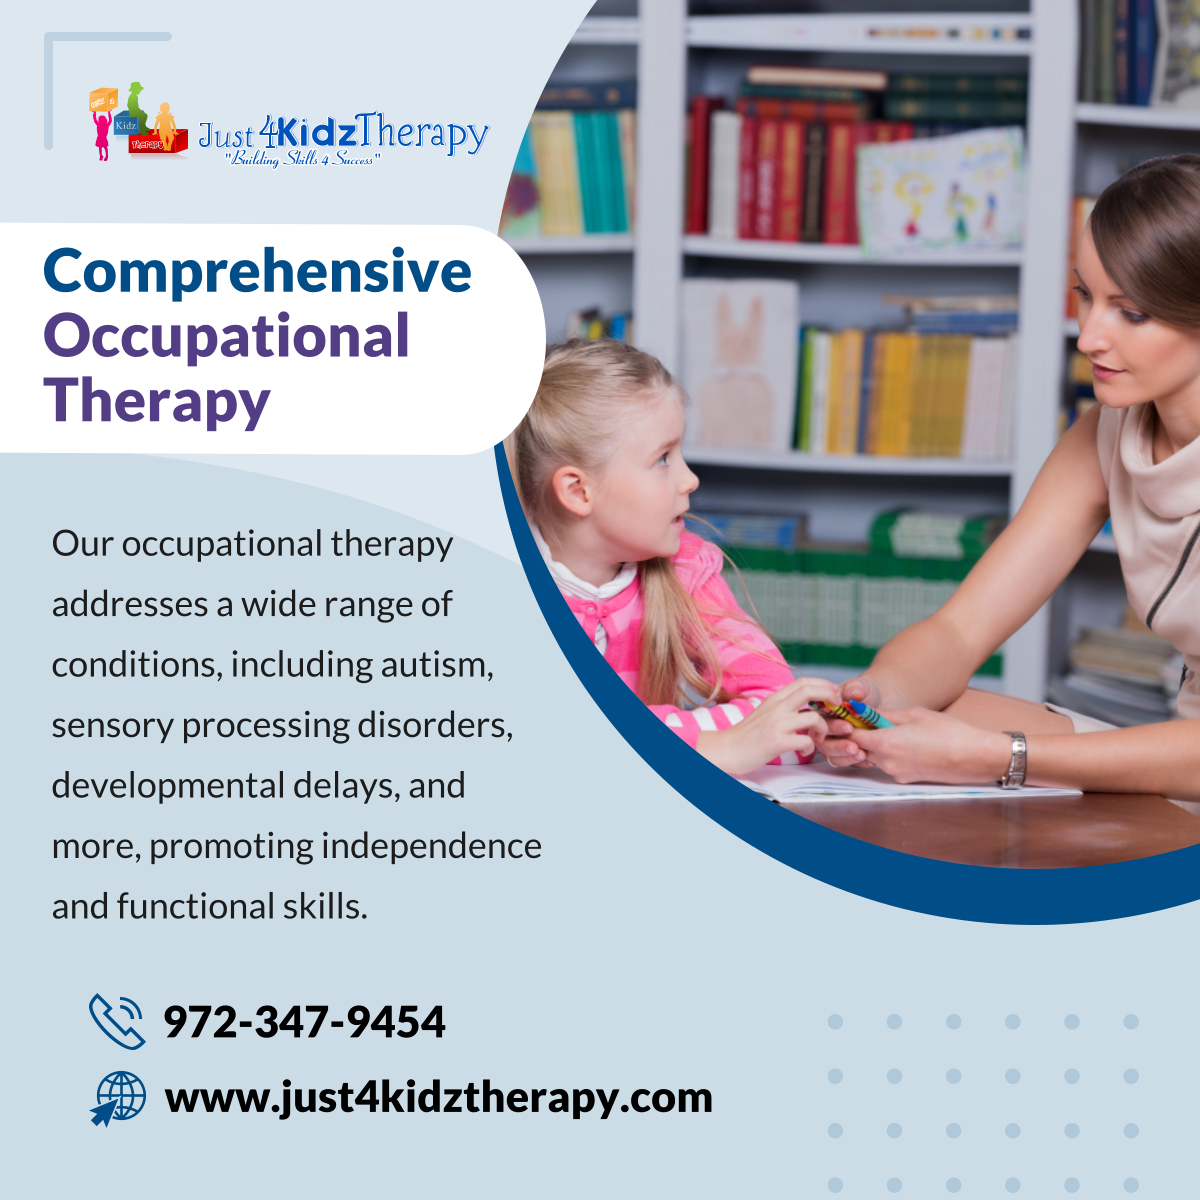 Experience the difference with our comprehensive occupational therapy services. Let us help your child thrive in their daily activities. 

#CollinCountyTX #PediatricTherapyServices #OccupationalTherapy #ChildDevelopment #ComprehensiveTherapy